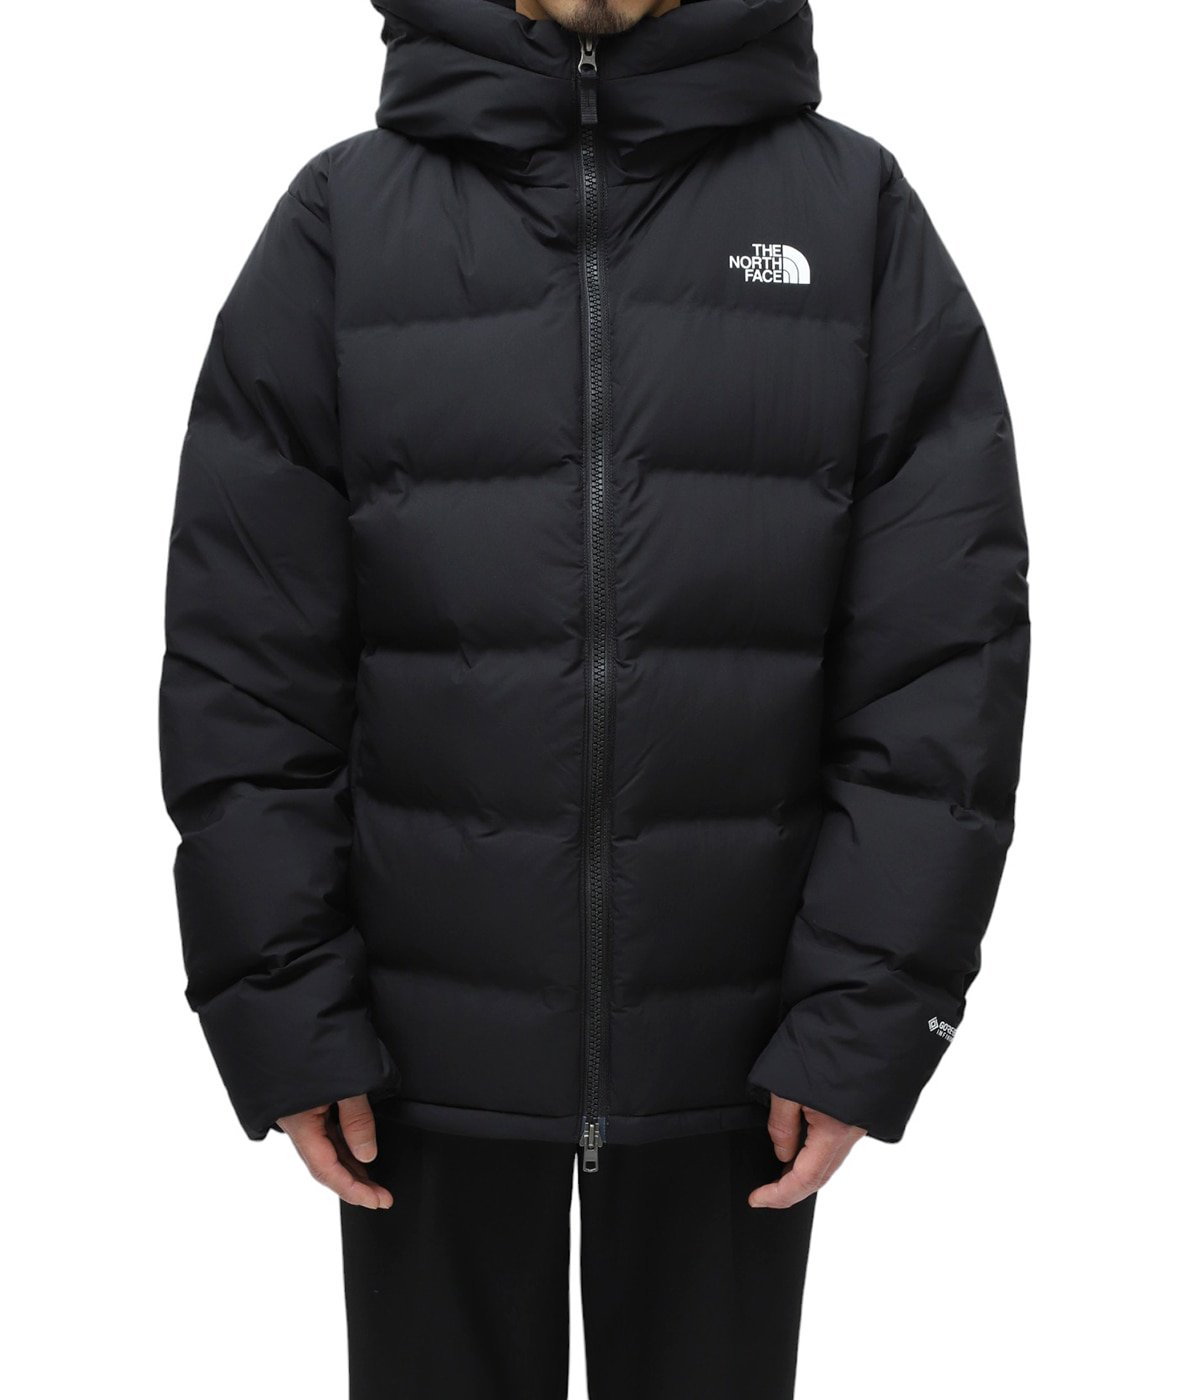 The north face belayer parka